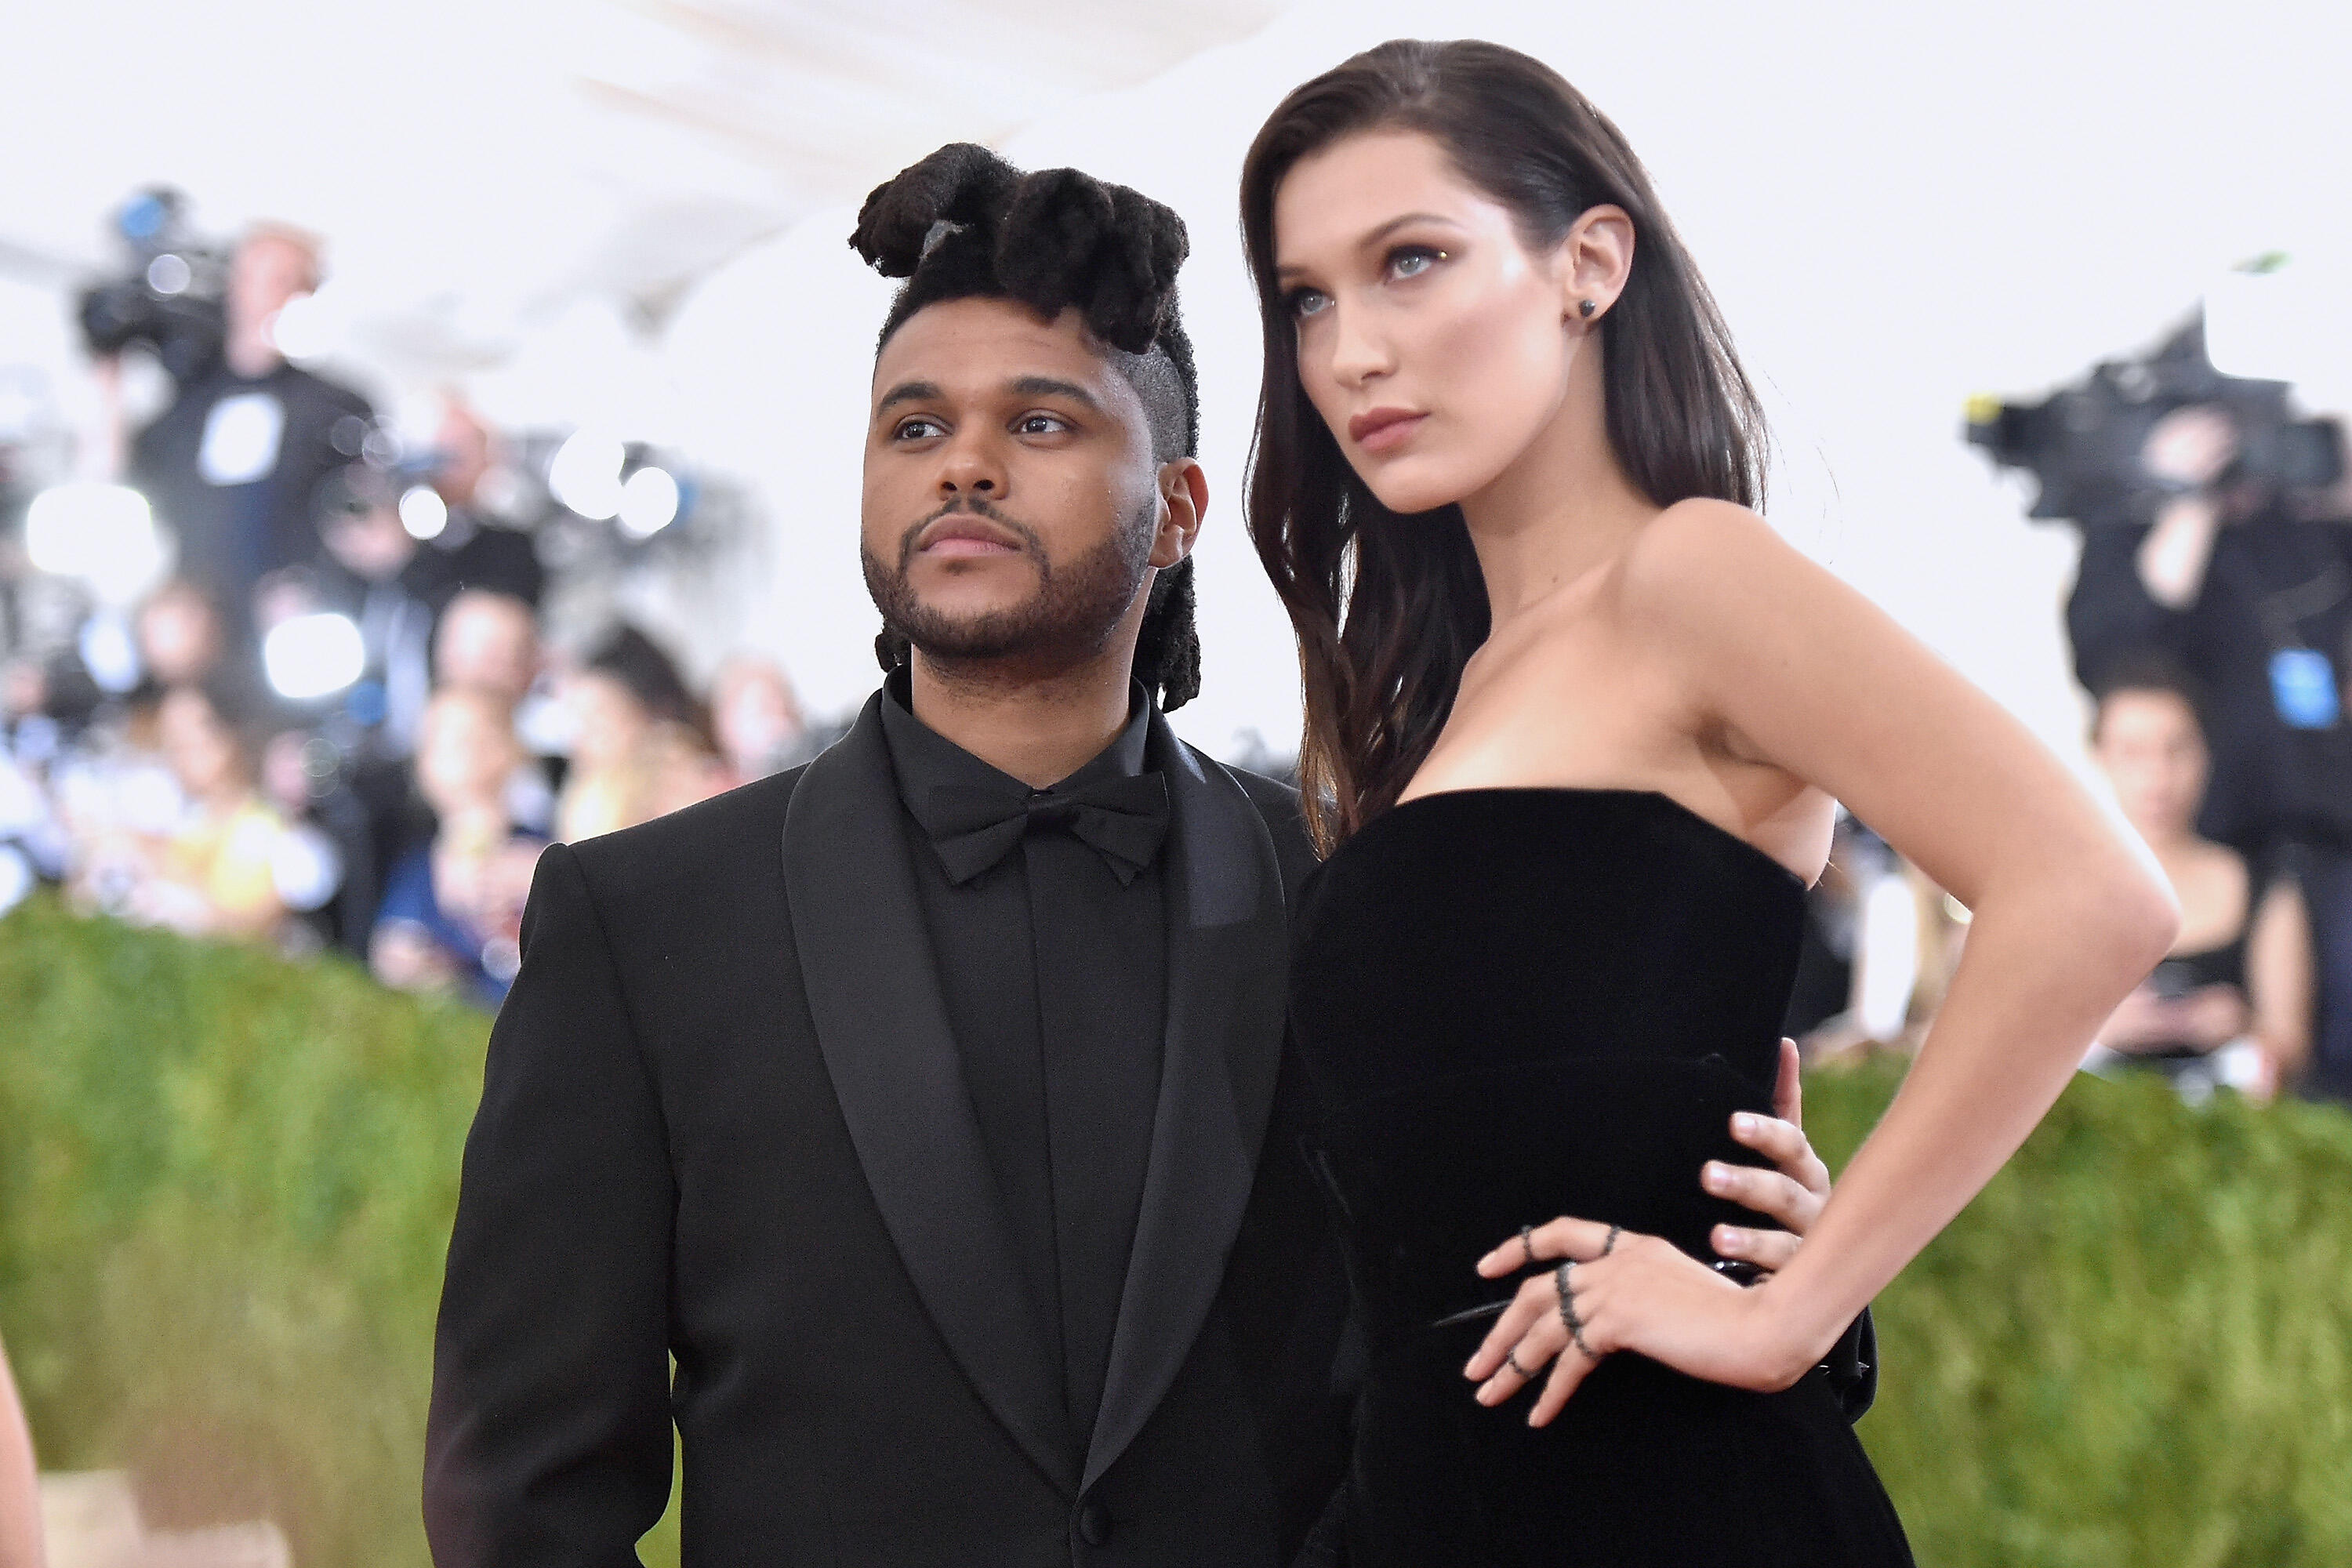 Is This The Reason The Weeknd and Bella Hadid Broke Up? - Thumbnail Image